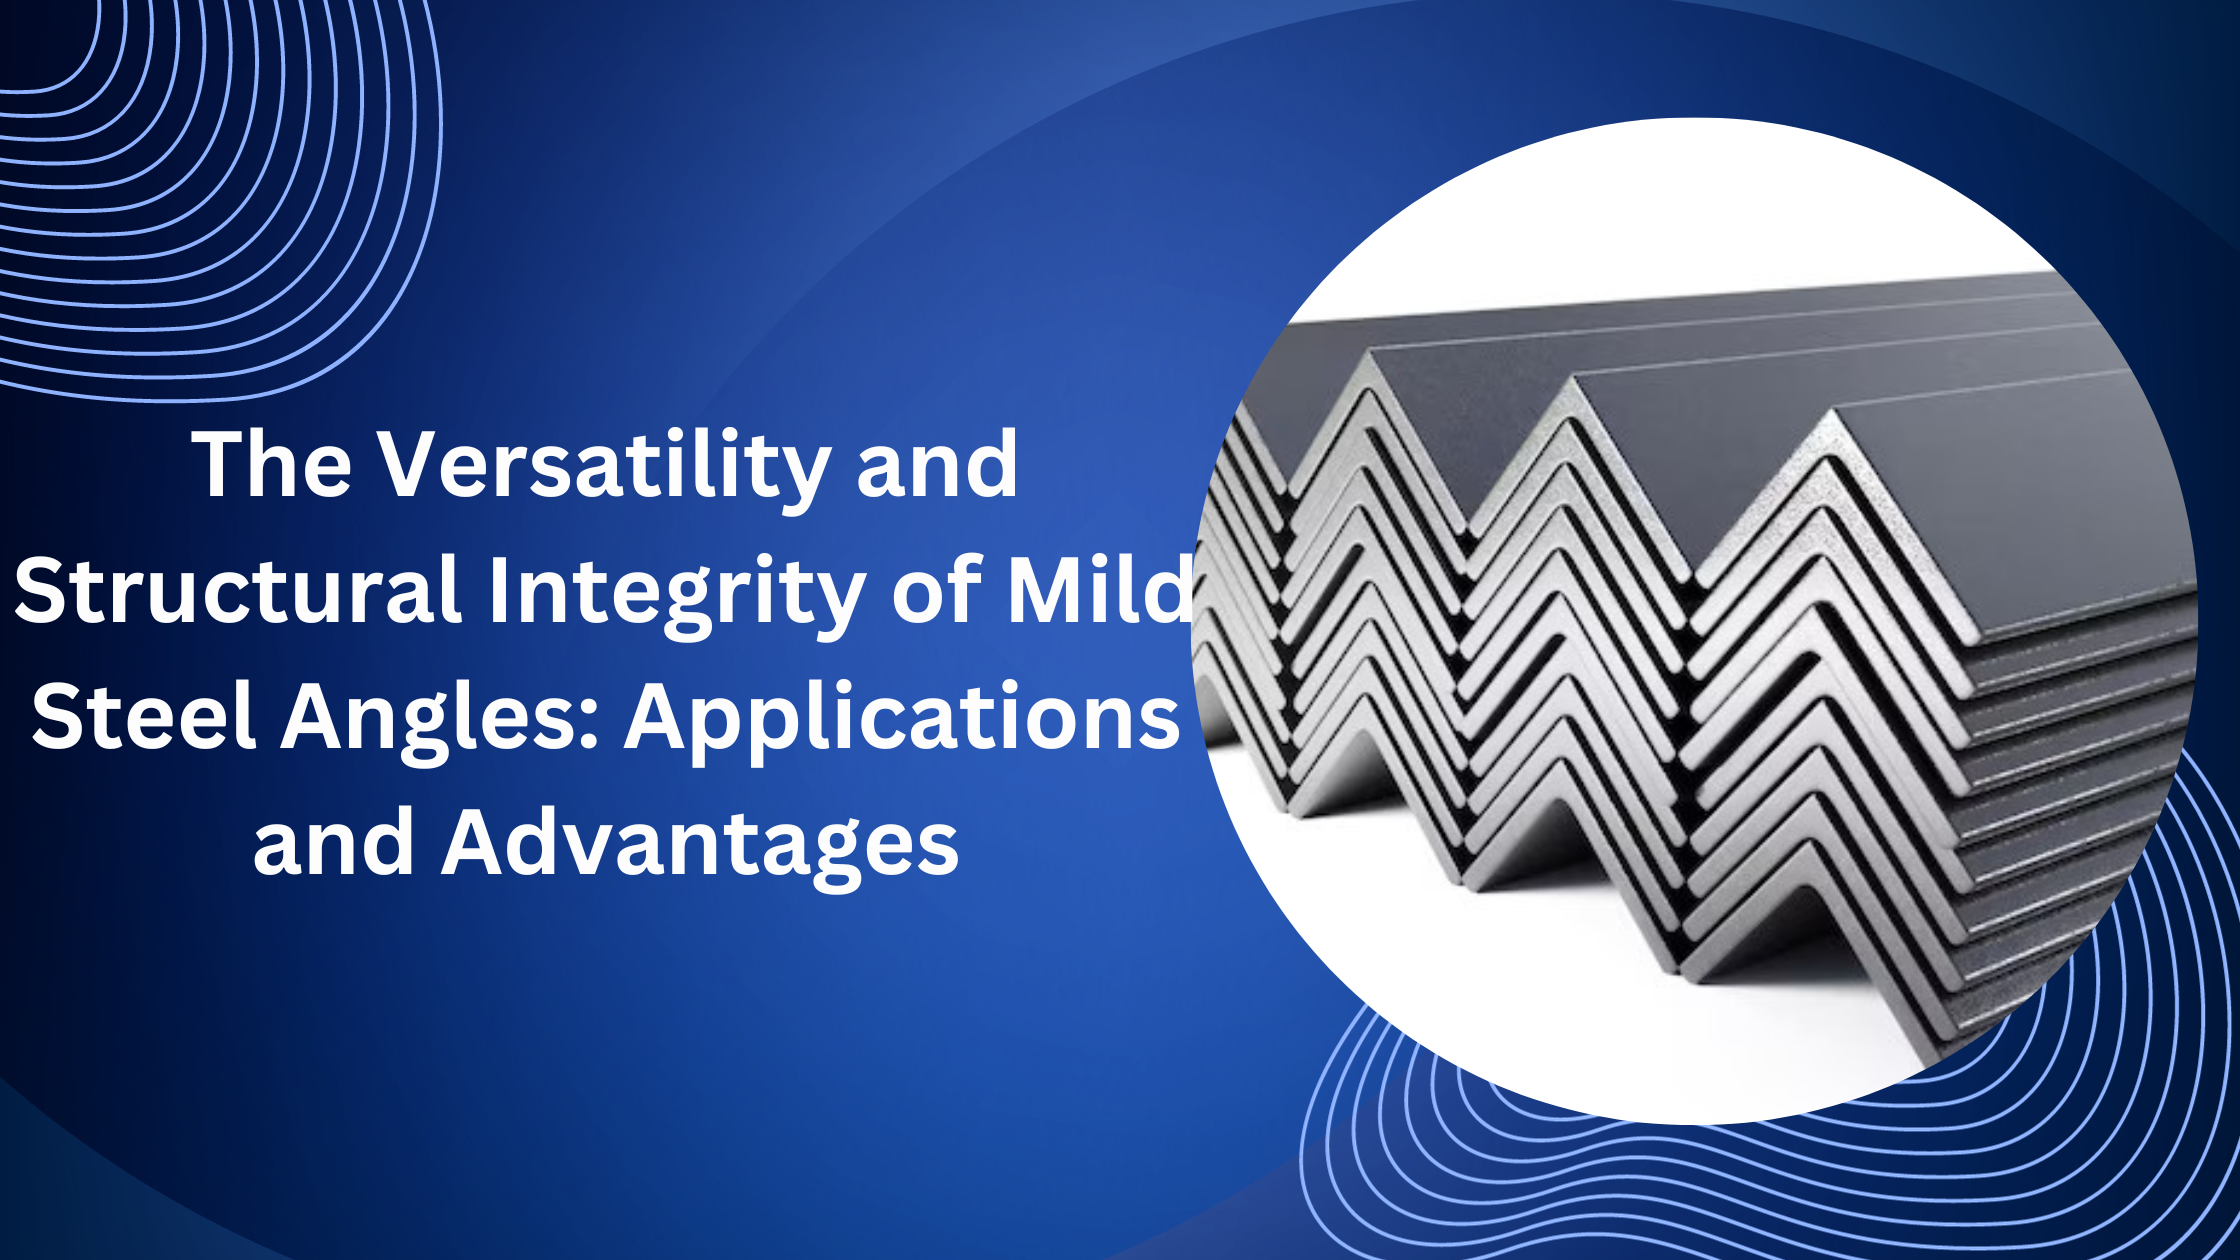 The Versatility and Structural Integrity of Mild Steel Angles: Applications and Advantages